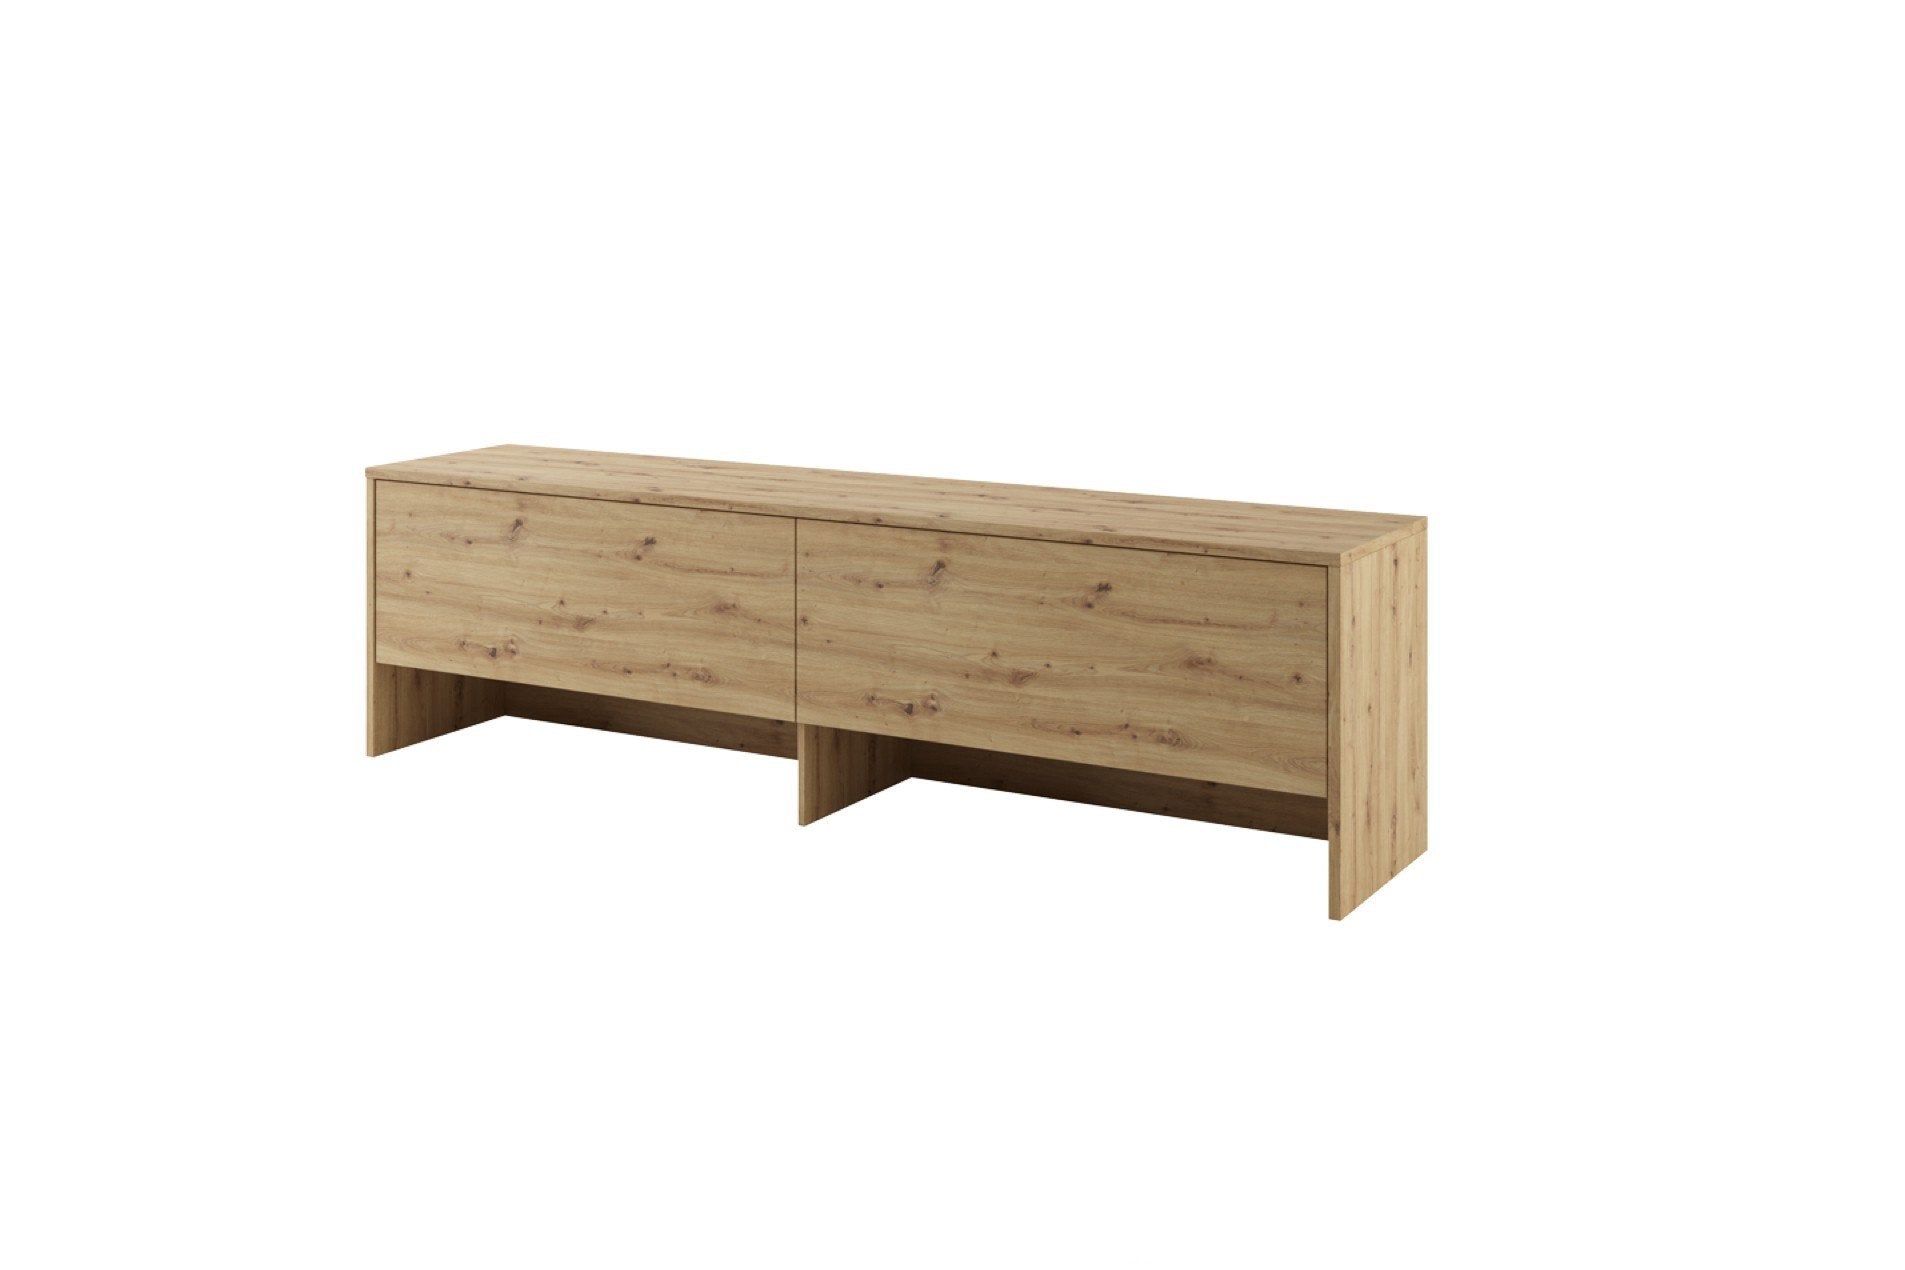 BC-09 Over Bed Unit for Horizontal Wall Bed Concept 140cm Oak Artisan Wall Bed with Storage Unit 